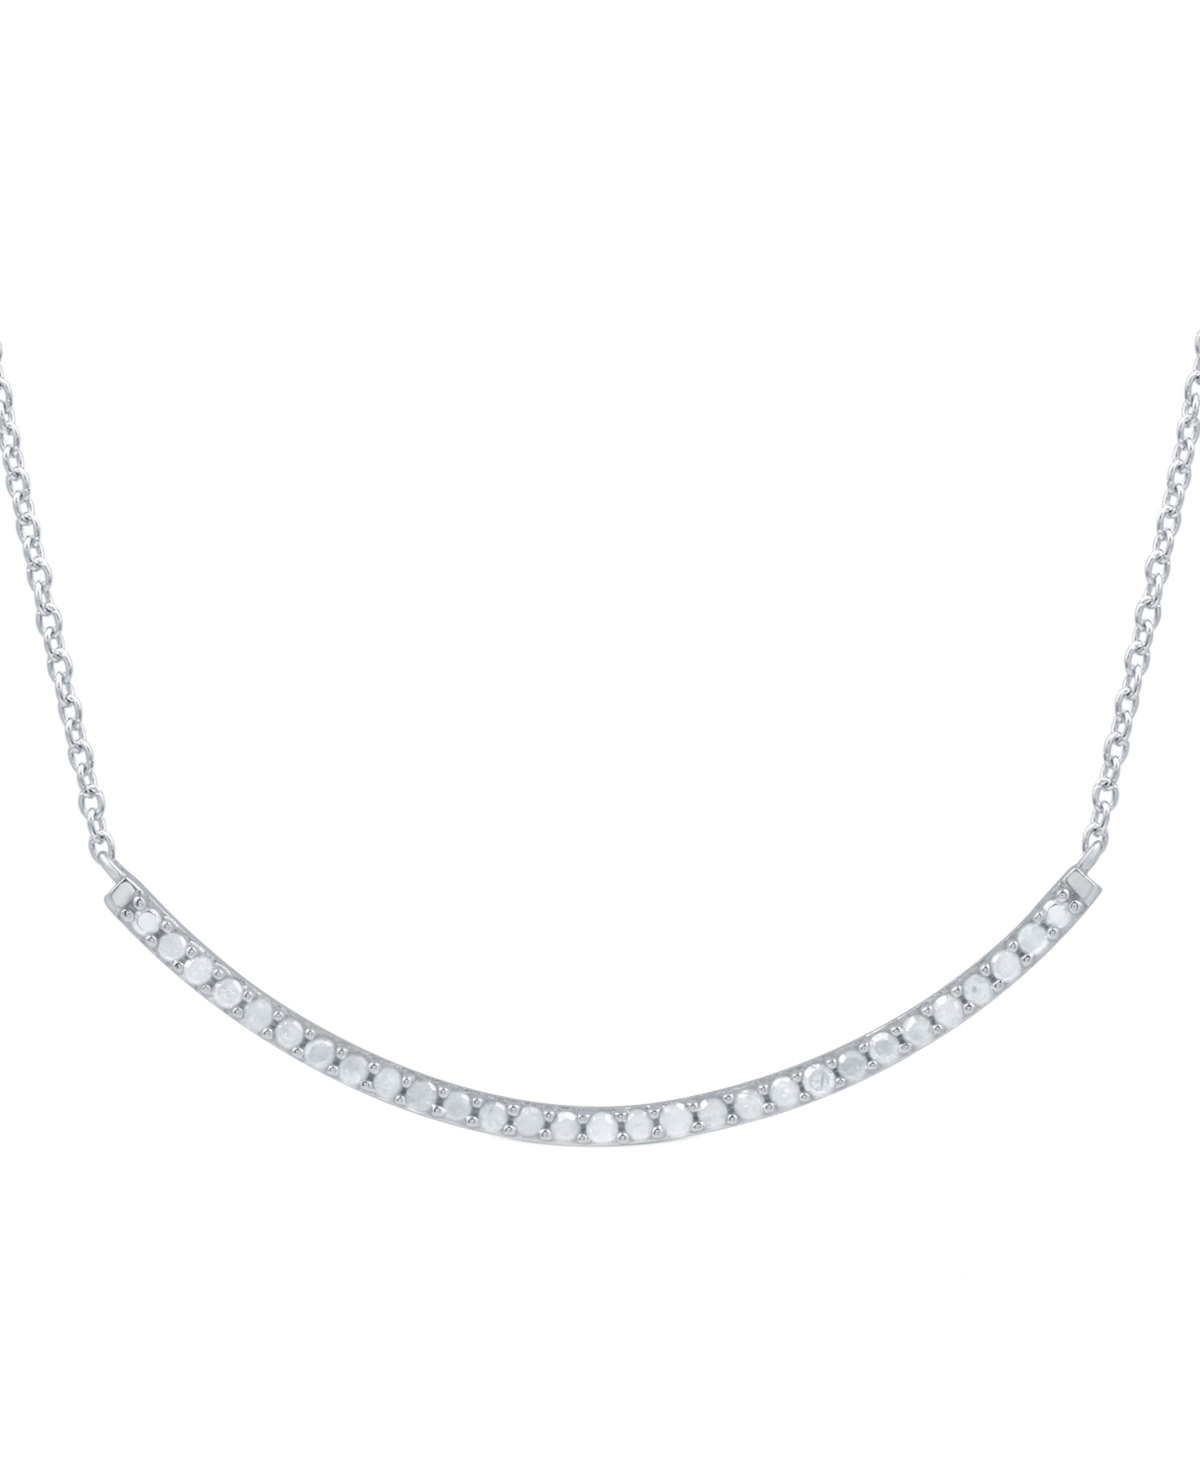 Diamond Curved Bar 16" Collar Necklace (1/4 ct. t.w.) in Sterling Silver - Sterling Silver